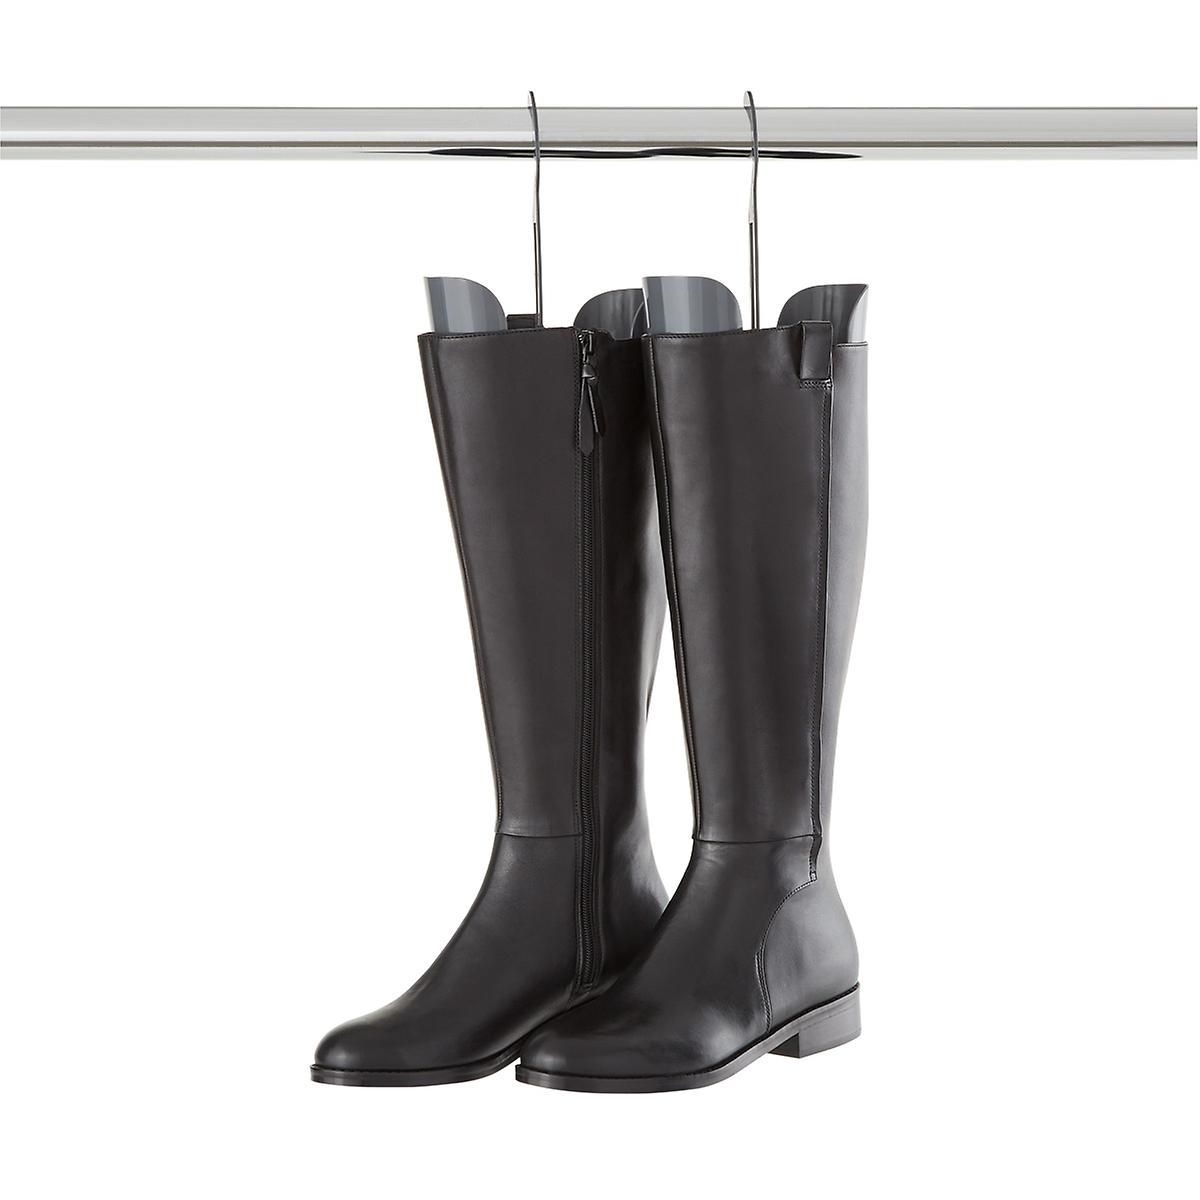 Tall Grey Boot Shapers | The Container Store